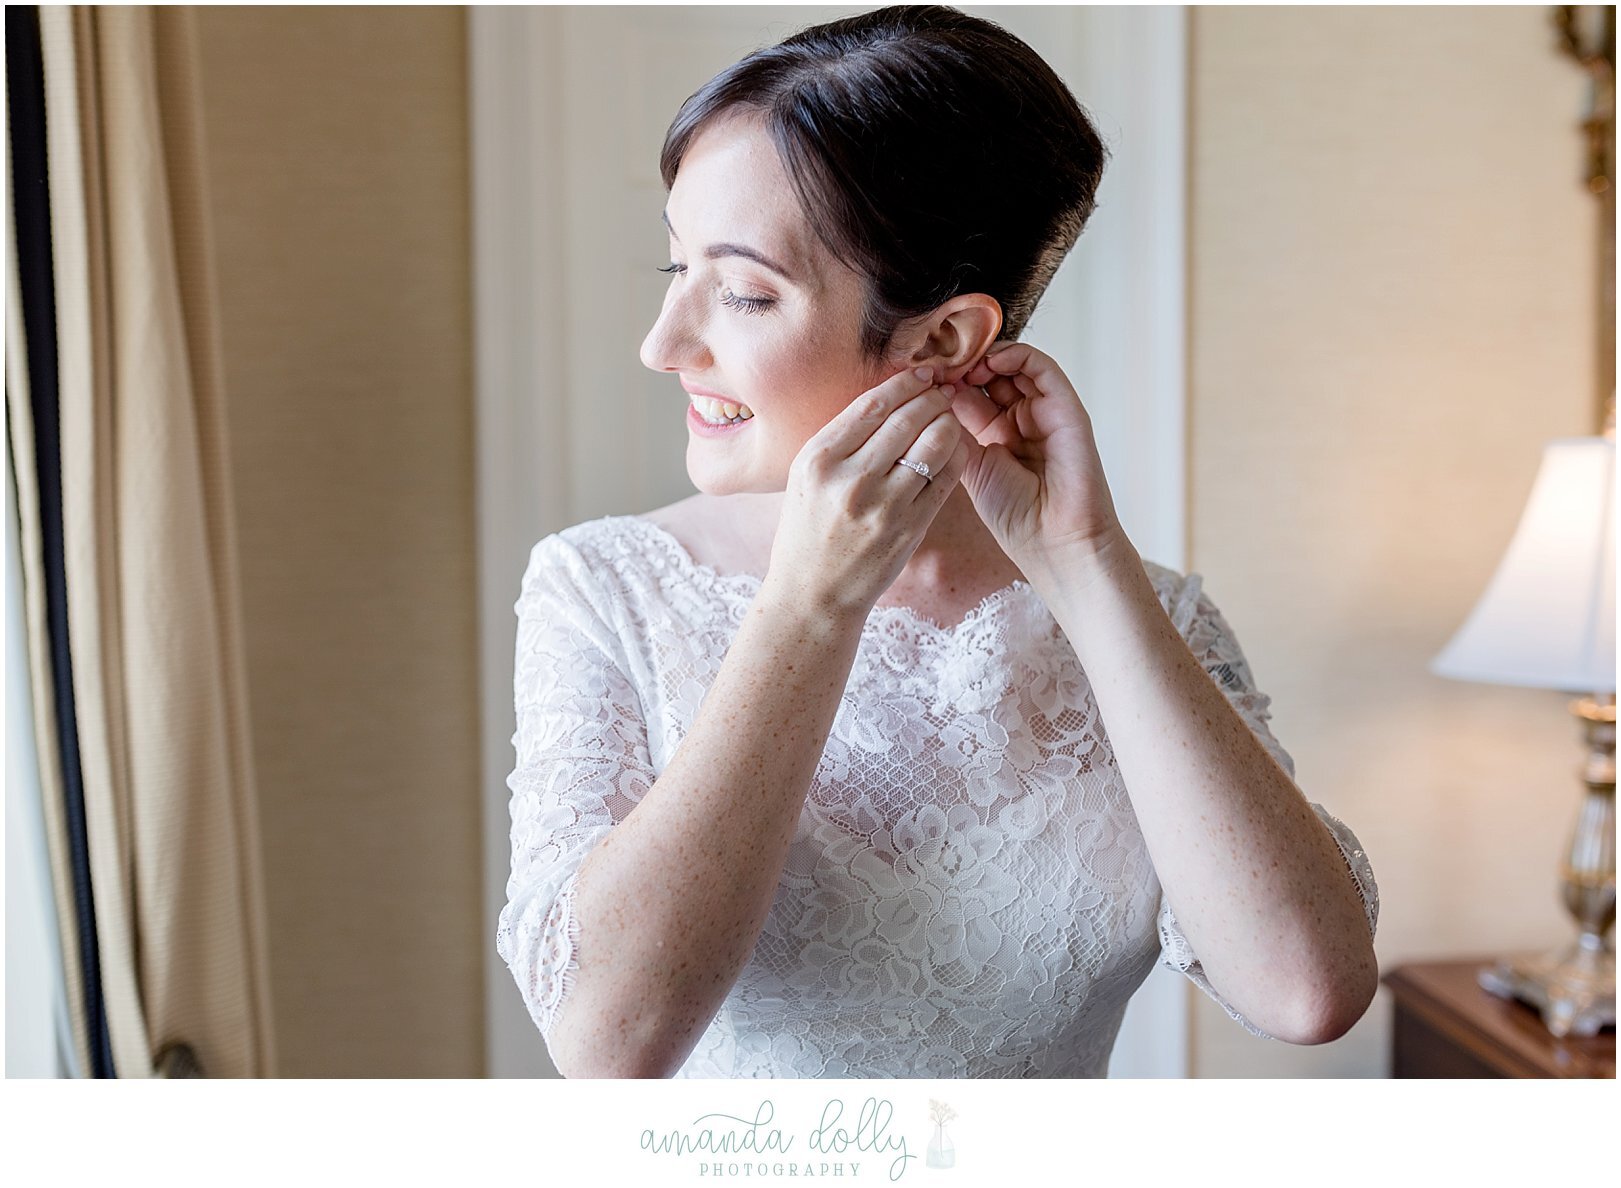 The Molly Pitcher Inn Wedding Photography